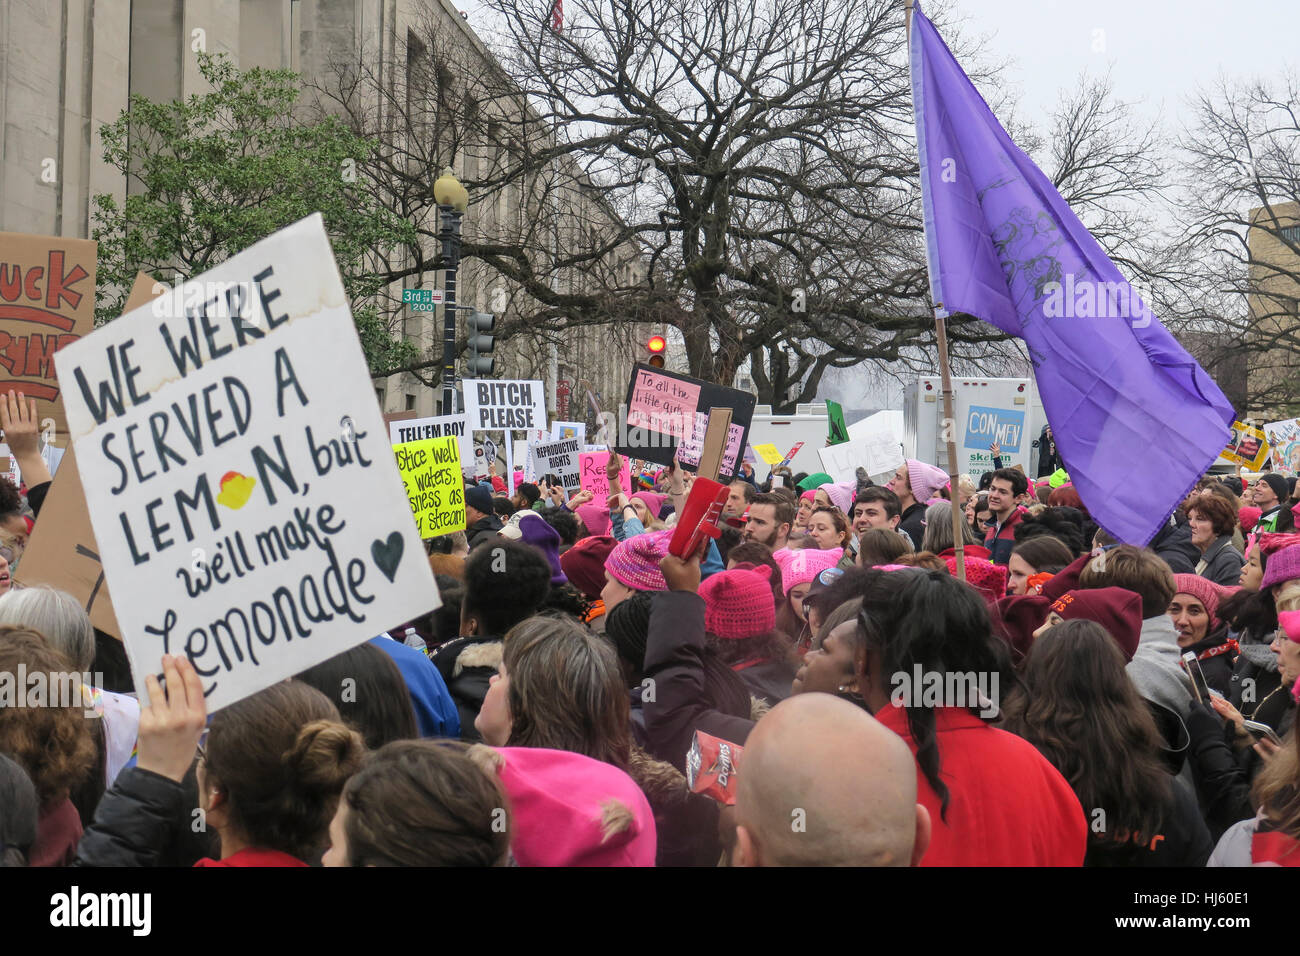 Women's march protesters in Washington, D.C. on January 21, 2017 Stock Photo